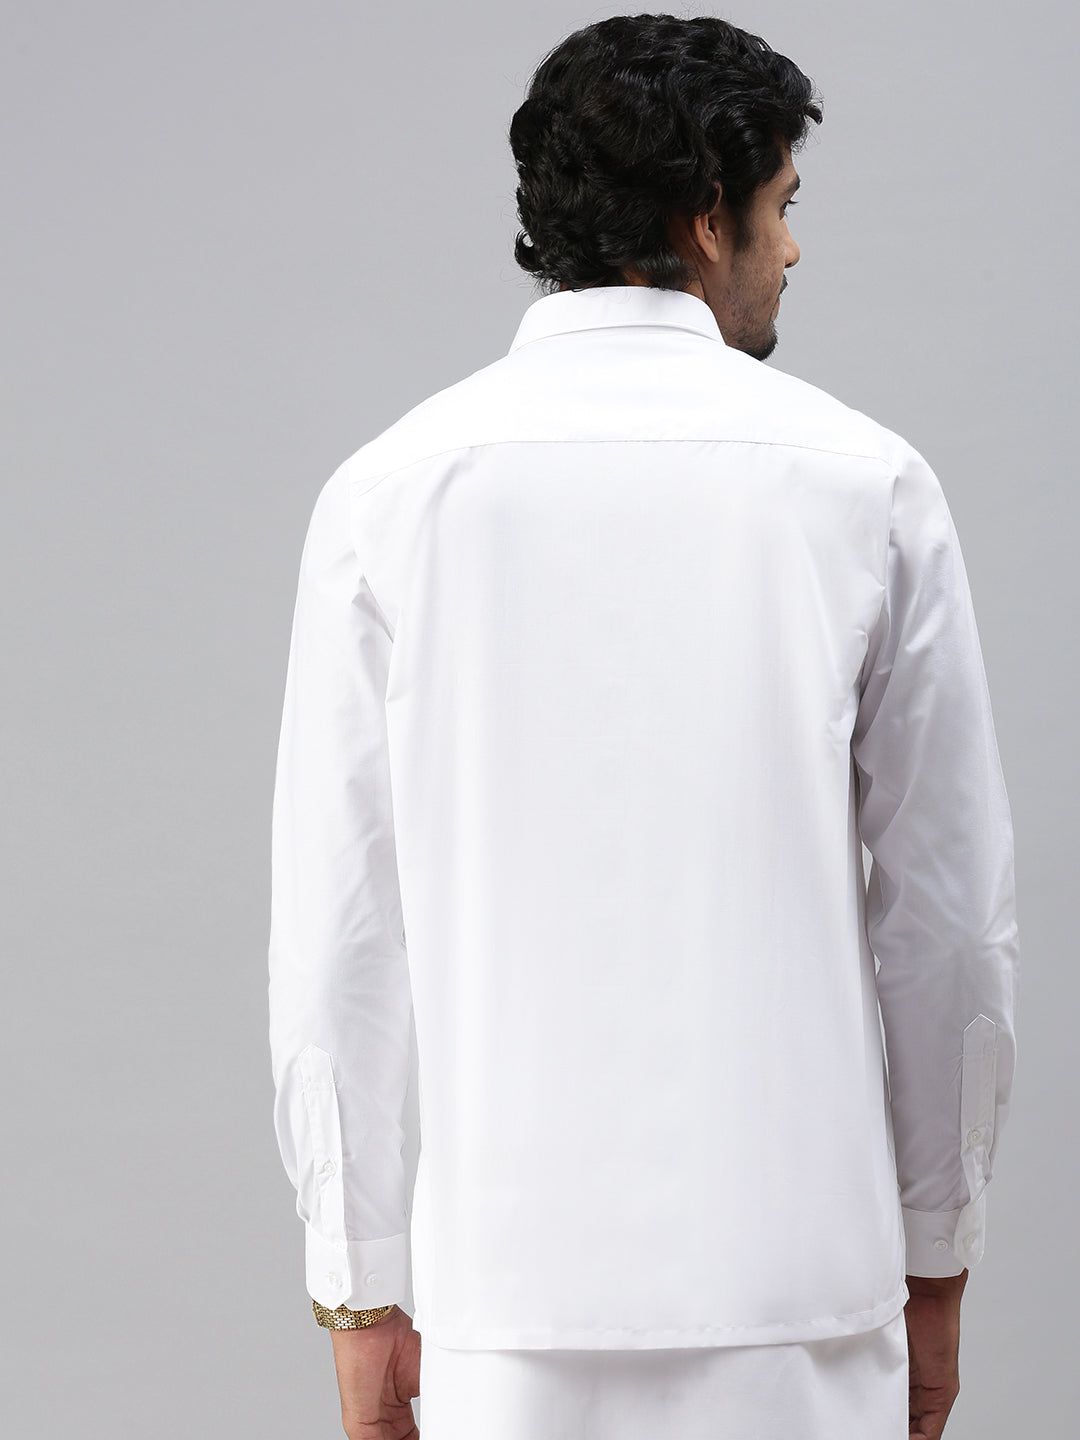 Mens Wrinkle Free White Shirt Full Sleeves Soft Touch-Back view